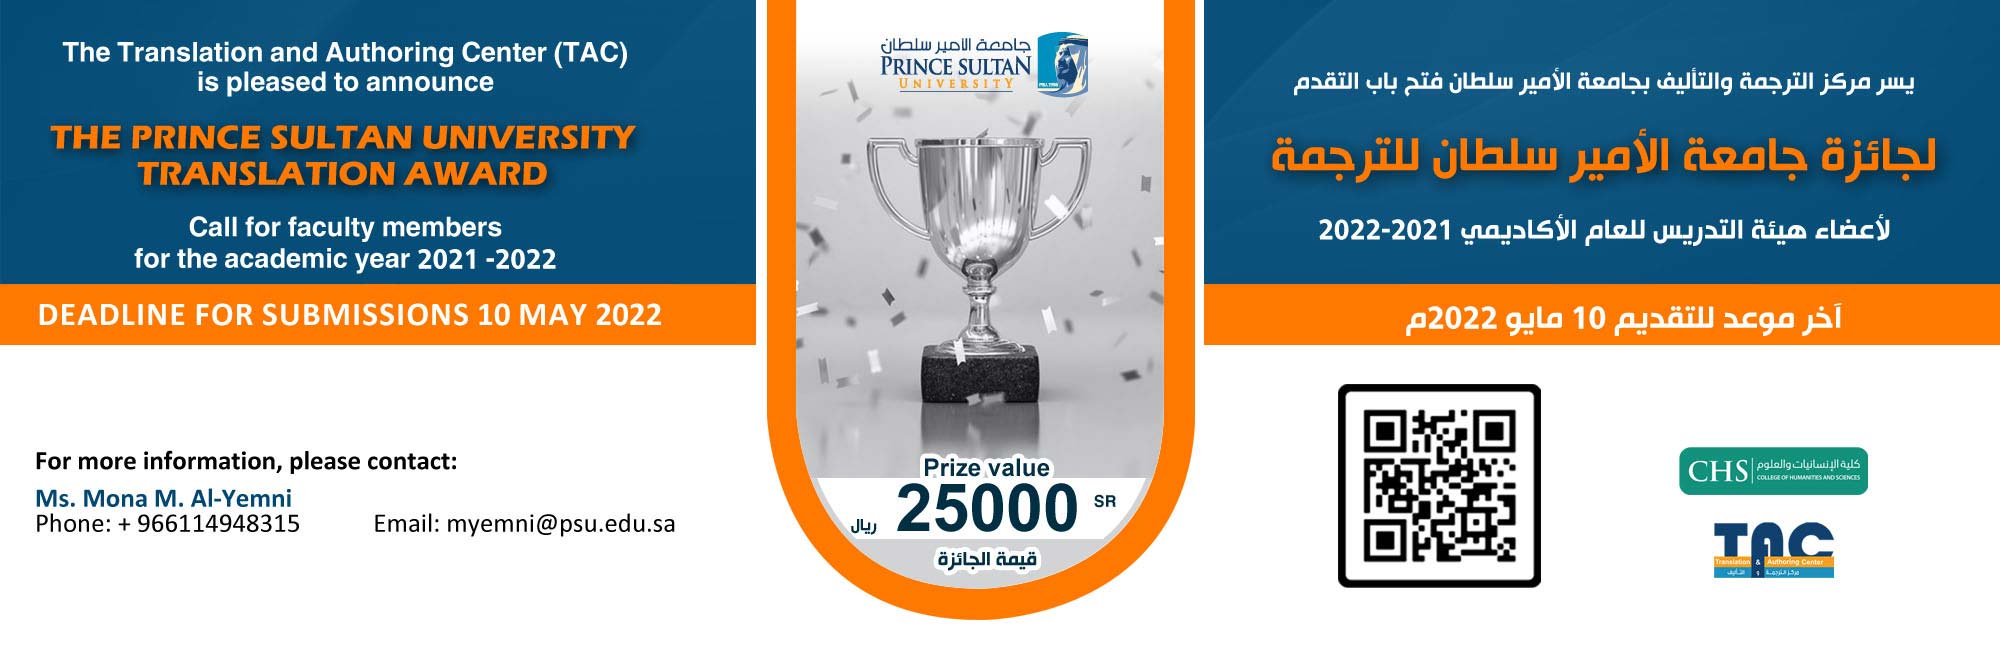 The Prince Sultan University Translation Award for Faculty - A.Y. 2021-2022